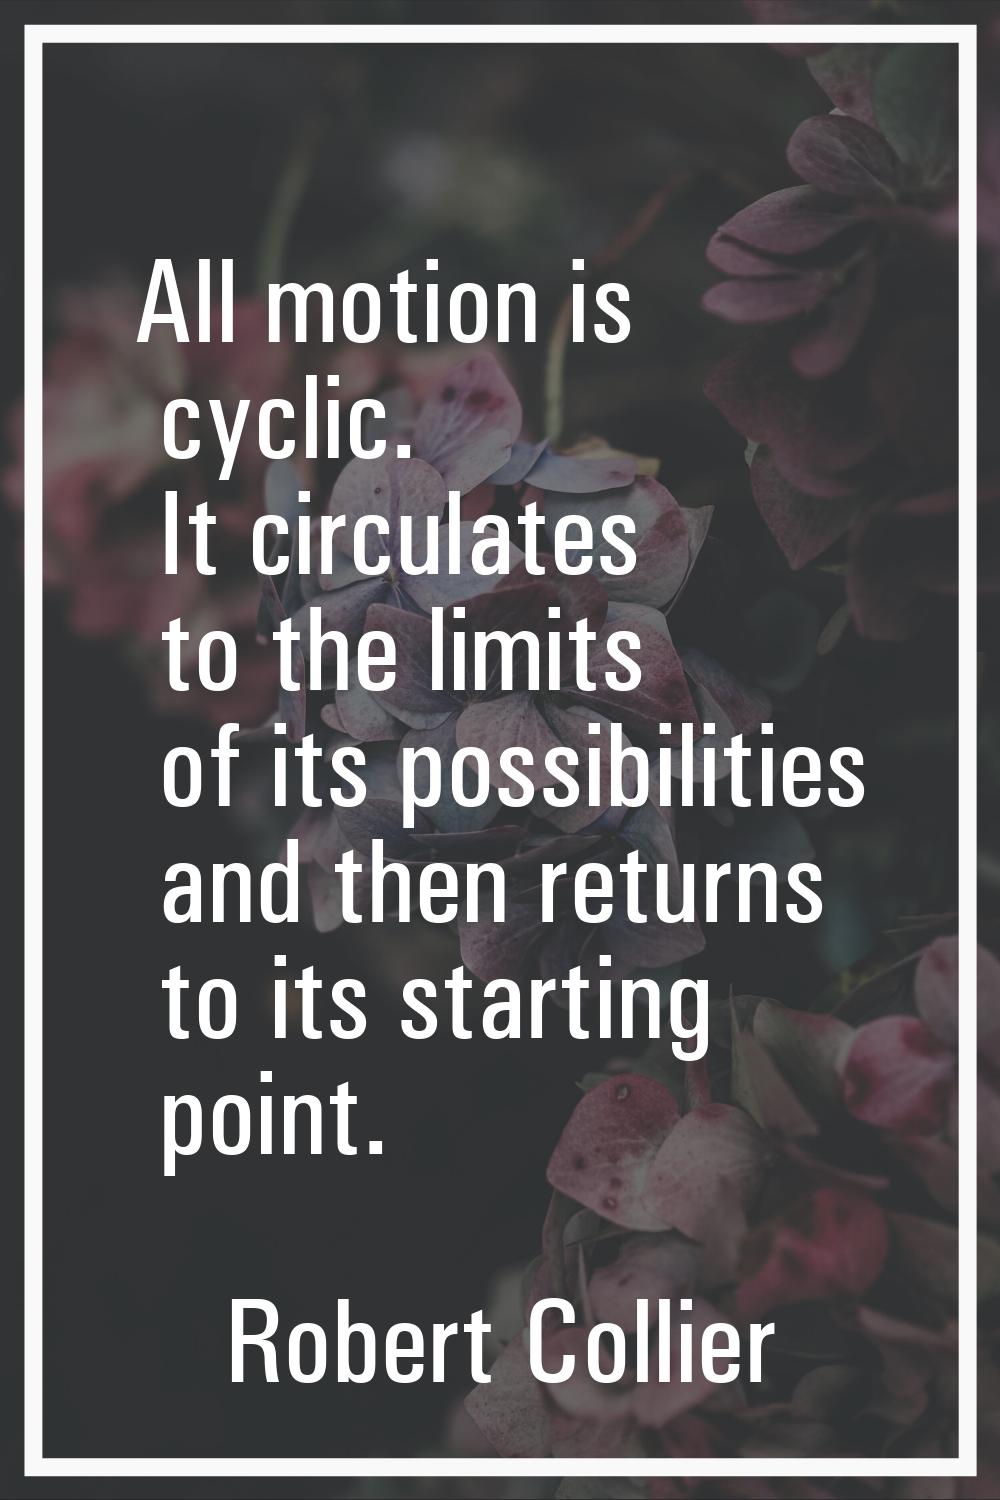 All motion is cyclic. It circulates to the limits of its possibilities and then returns to its star